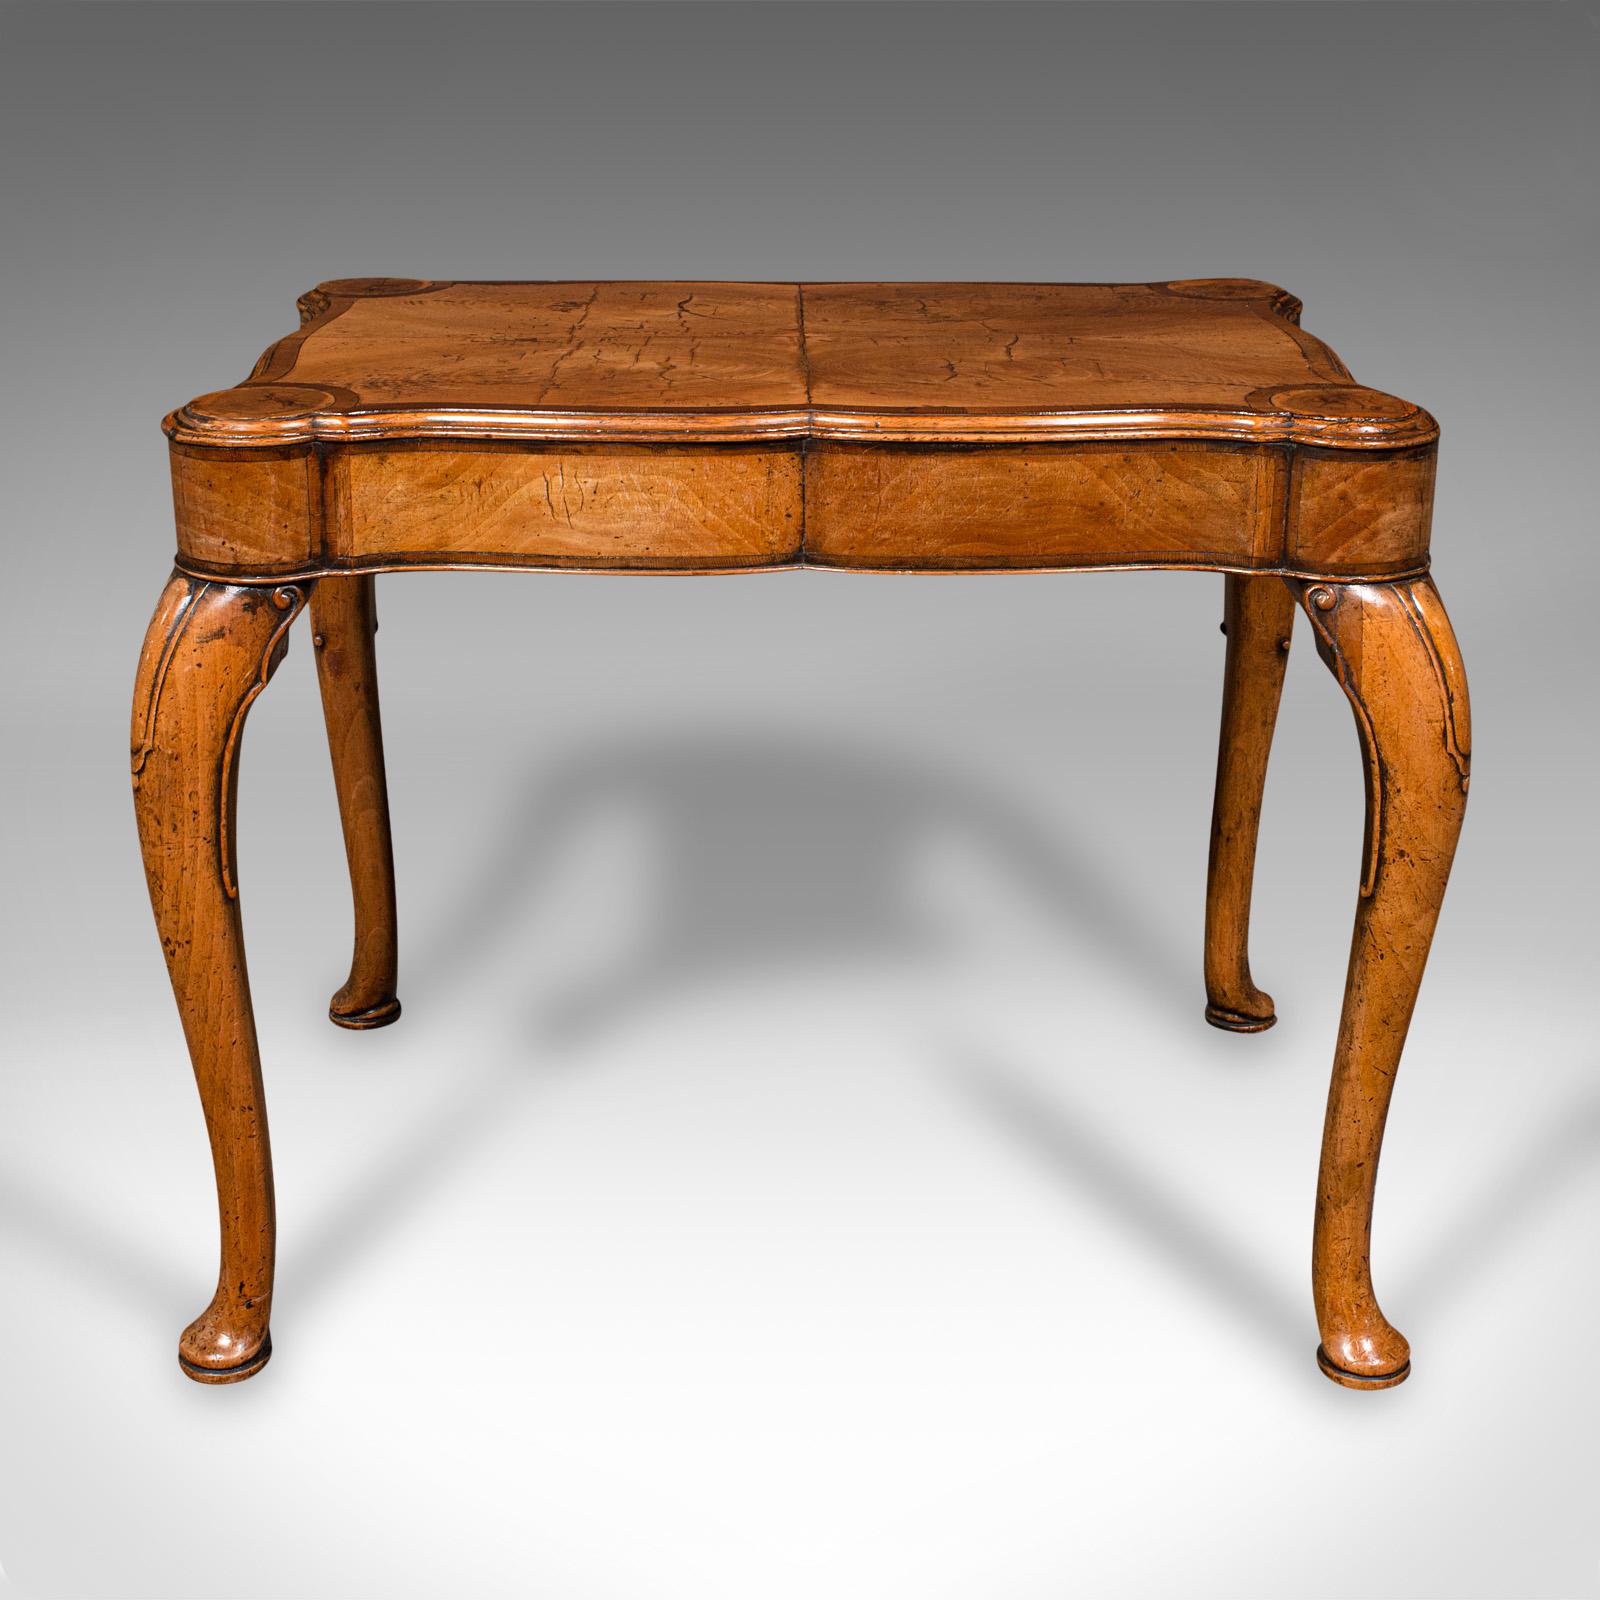 20th Century Antique Lamp Table, English Walnut, Occasional, Georgian Revival, Art Deco, 1920 For Sale